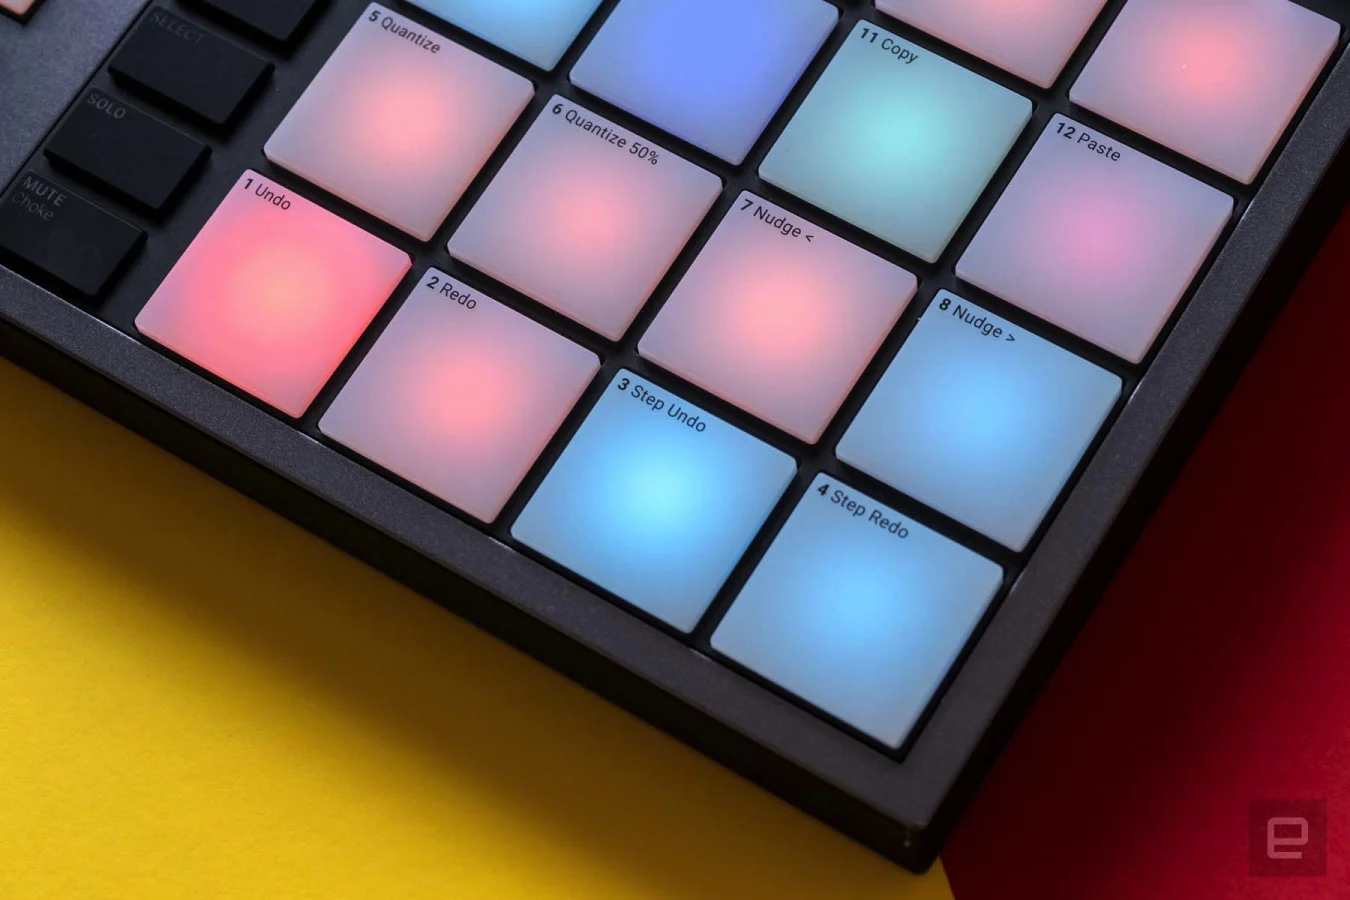 Maschine+ review.